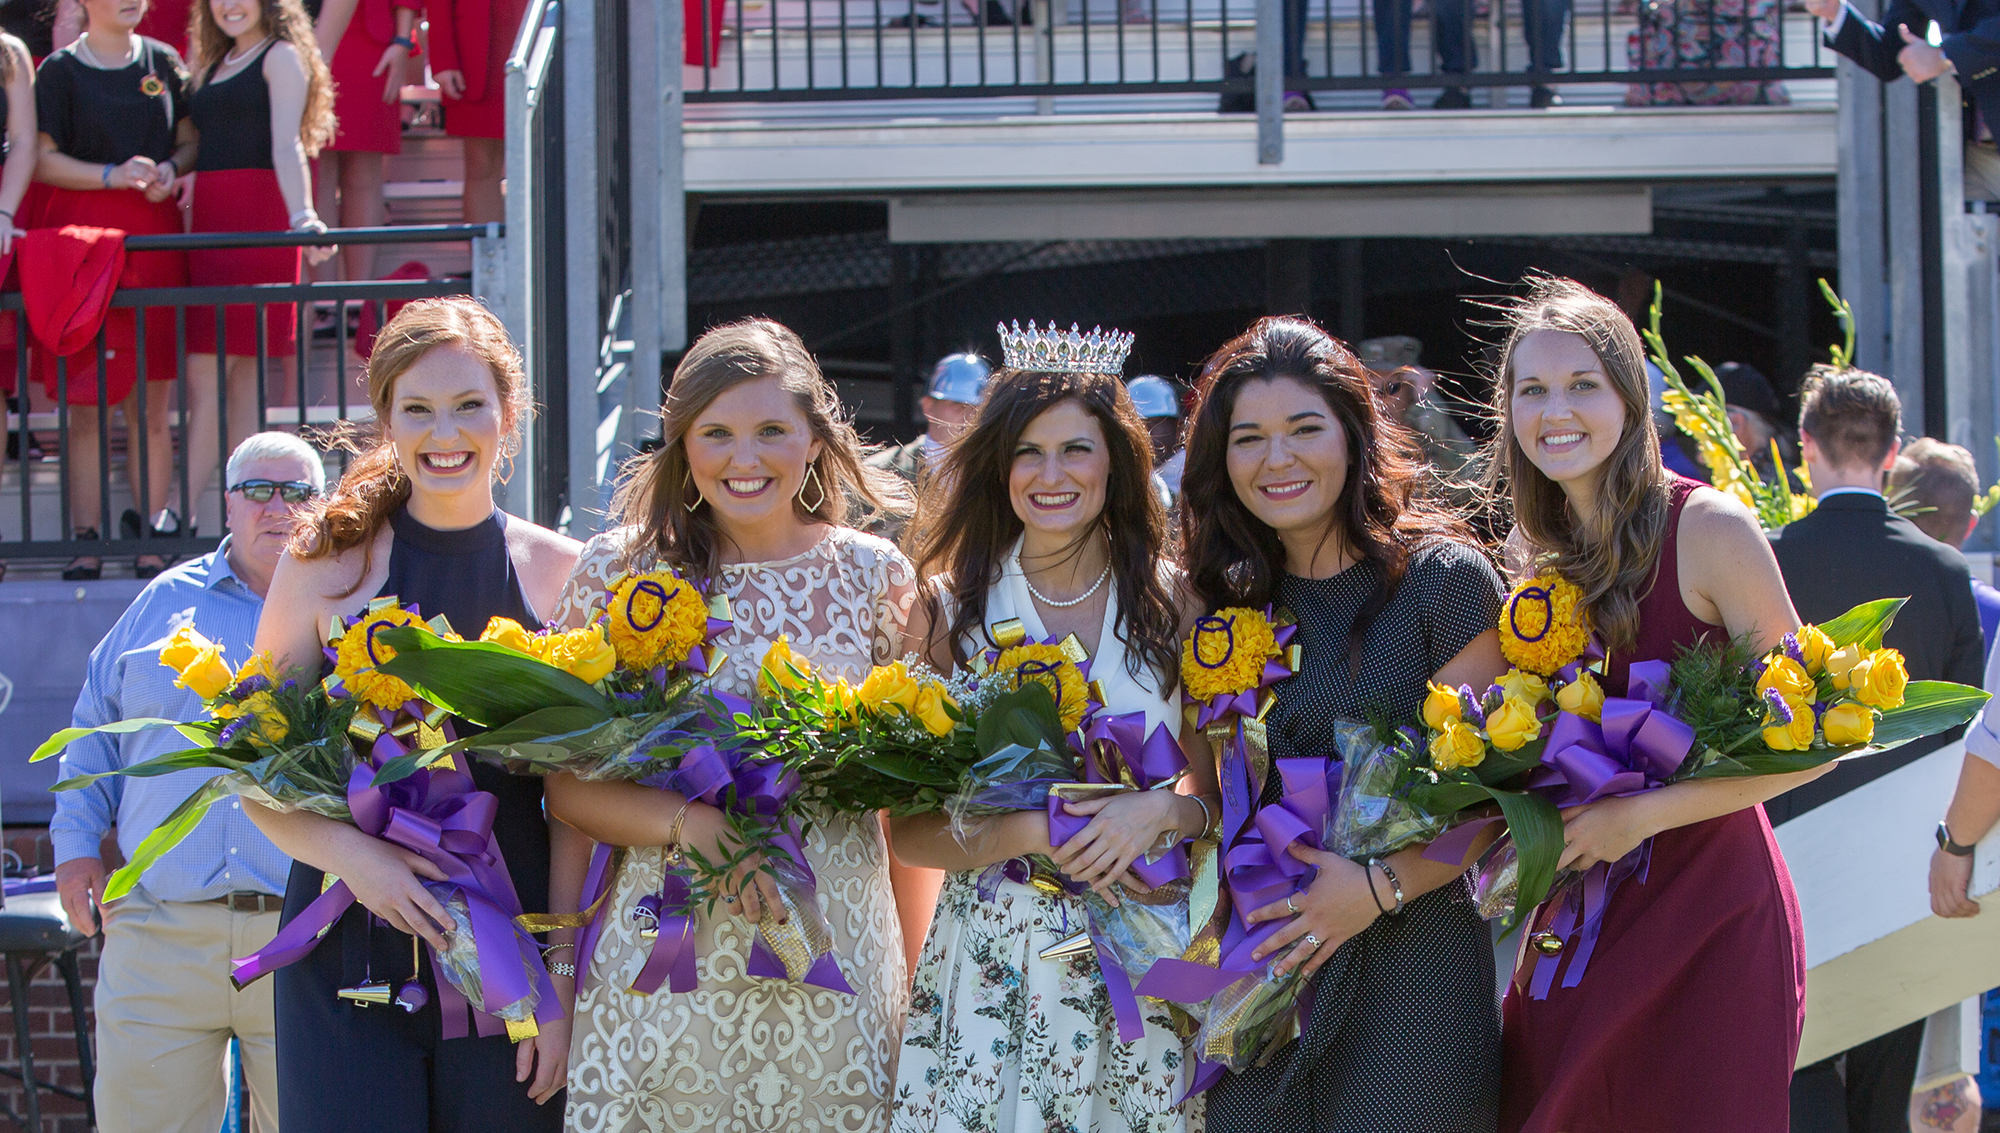 Ouachita’s 2017 Homecoming Queen, Hannah Bunch (center), gathers with members of the Homecoming Court (from left): Jessica McCauley, fourth runner-up; Haley Jo Wesson, second runner-up; JoBeth Guerra, first runner-up; and Madison Polk, third runner-up.